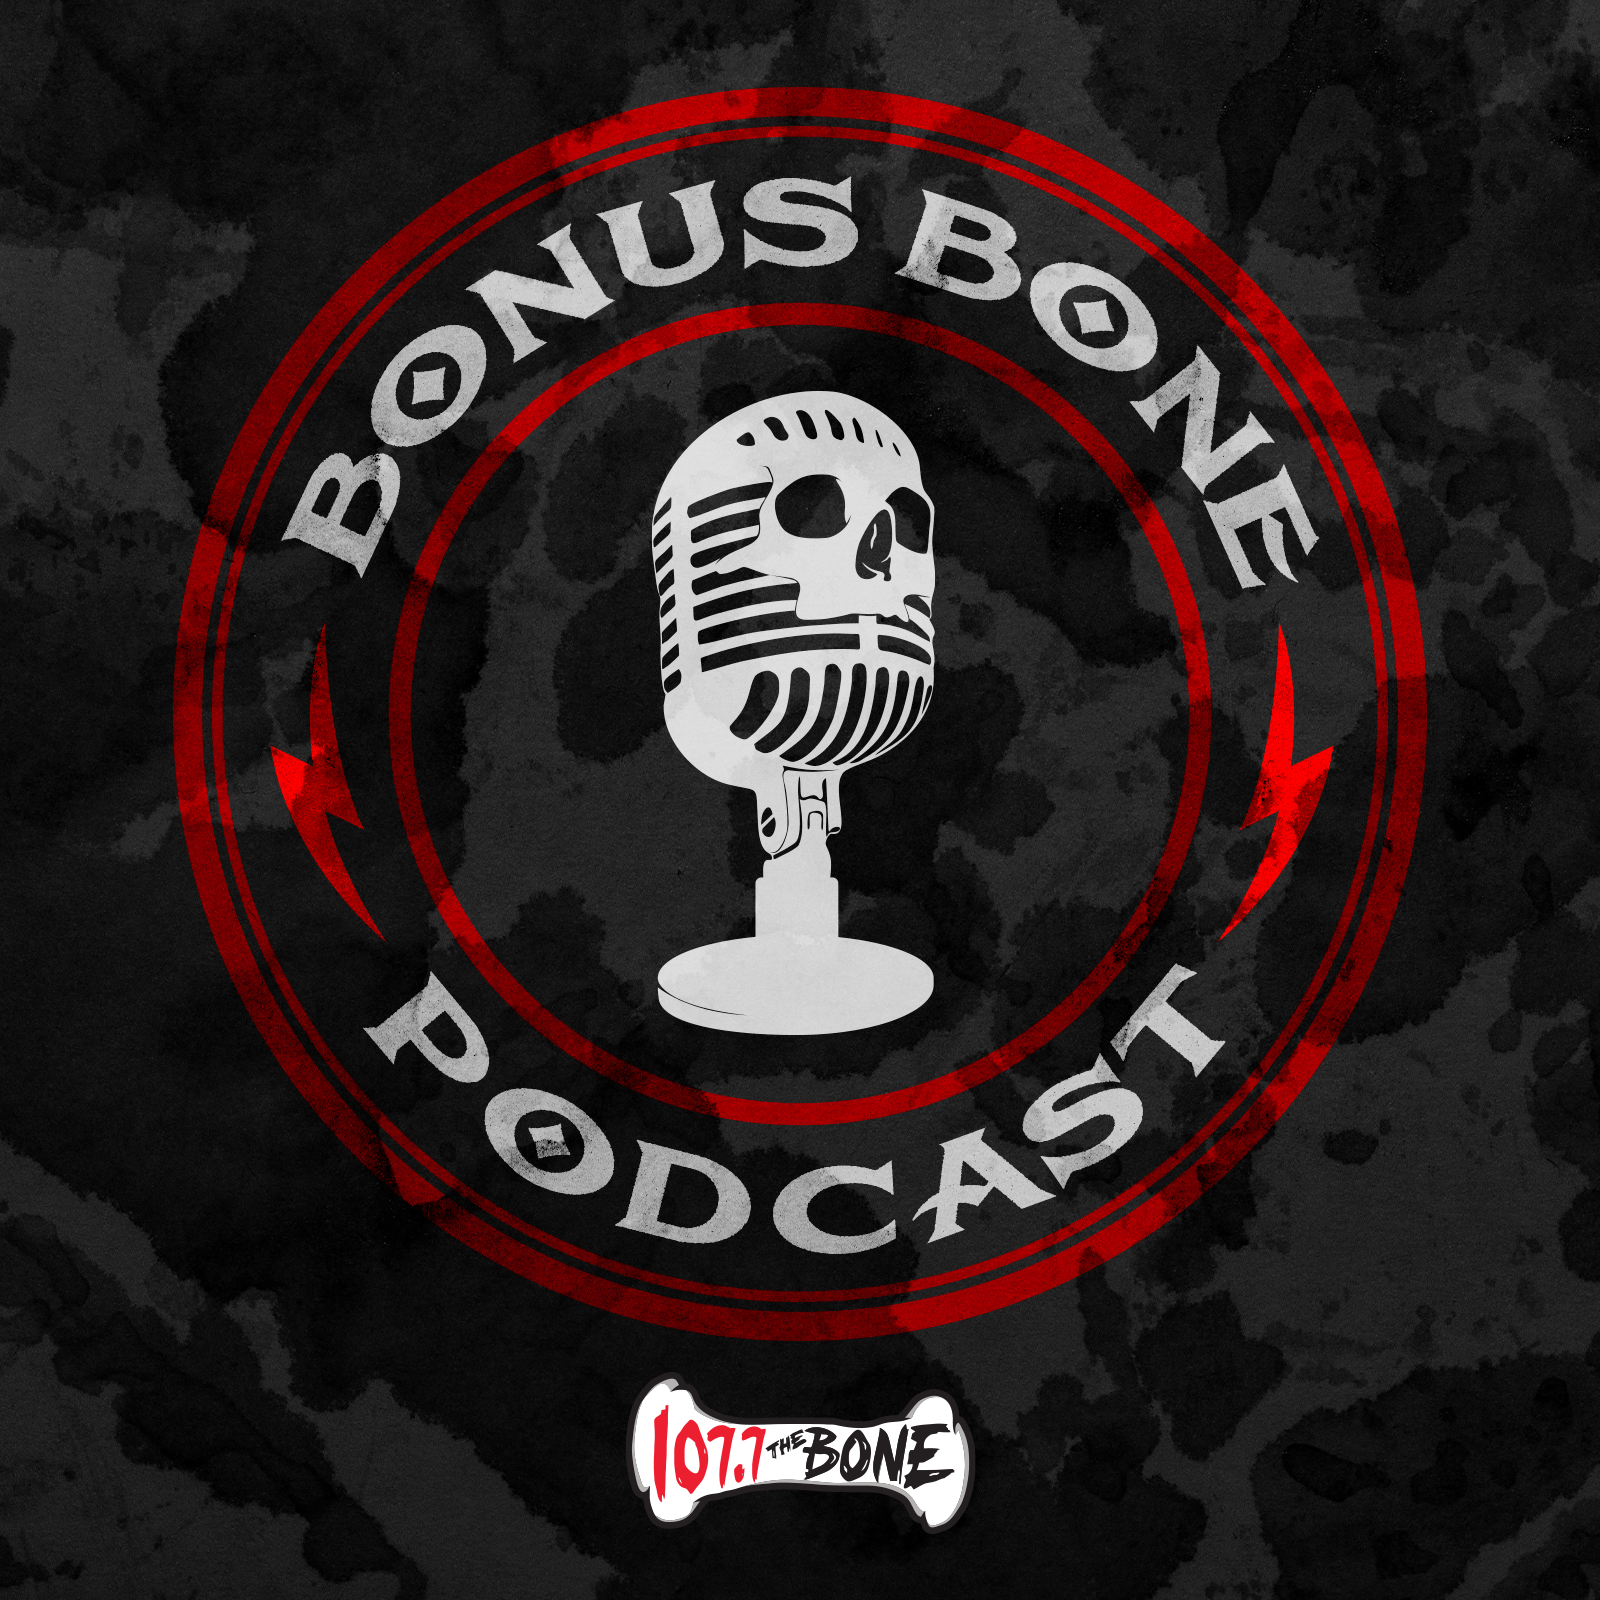 The Bonus Bone: When Did You See Someone Naked But Didn't Intend To?